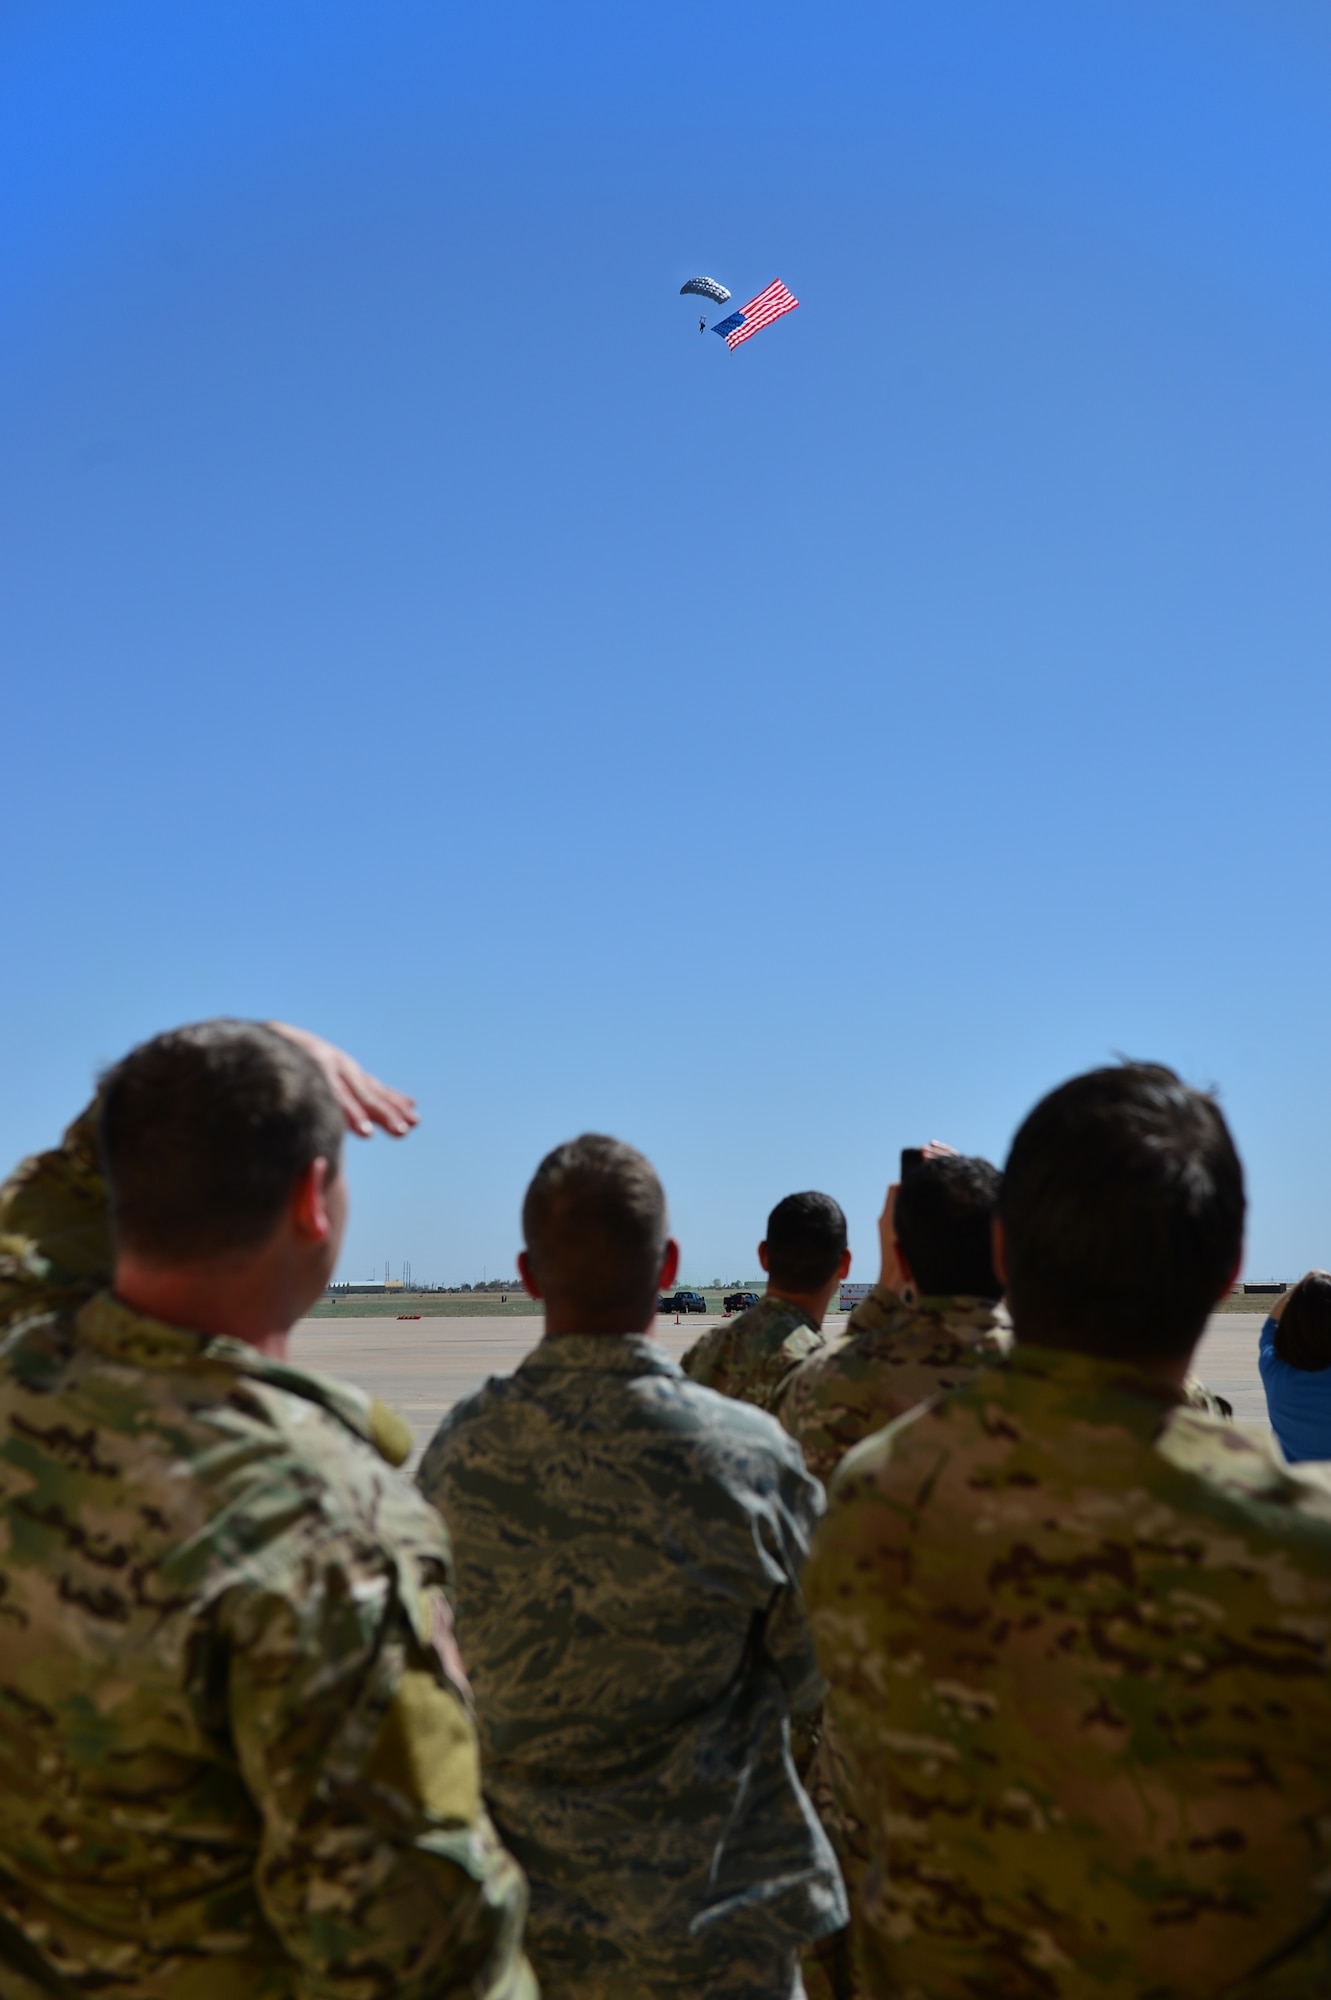 Viewers watch as a member of the 26th Special Tactics Squadron parachutes onto the flightline with an American flag, April 24, 2014 at Cannon Air Force Base, N.M. The 26 STS, formerly Detachment 1 of the 720th Special Tactics Group, Hurlburt Field, Fla., is a newly activated squadron based at Cannon. (U.S. Air Force photo/ Senior Airman Eboni Reece)